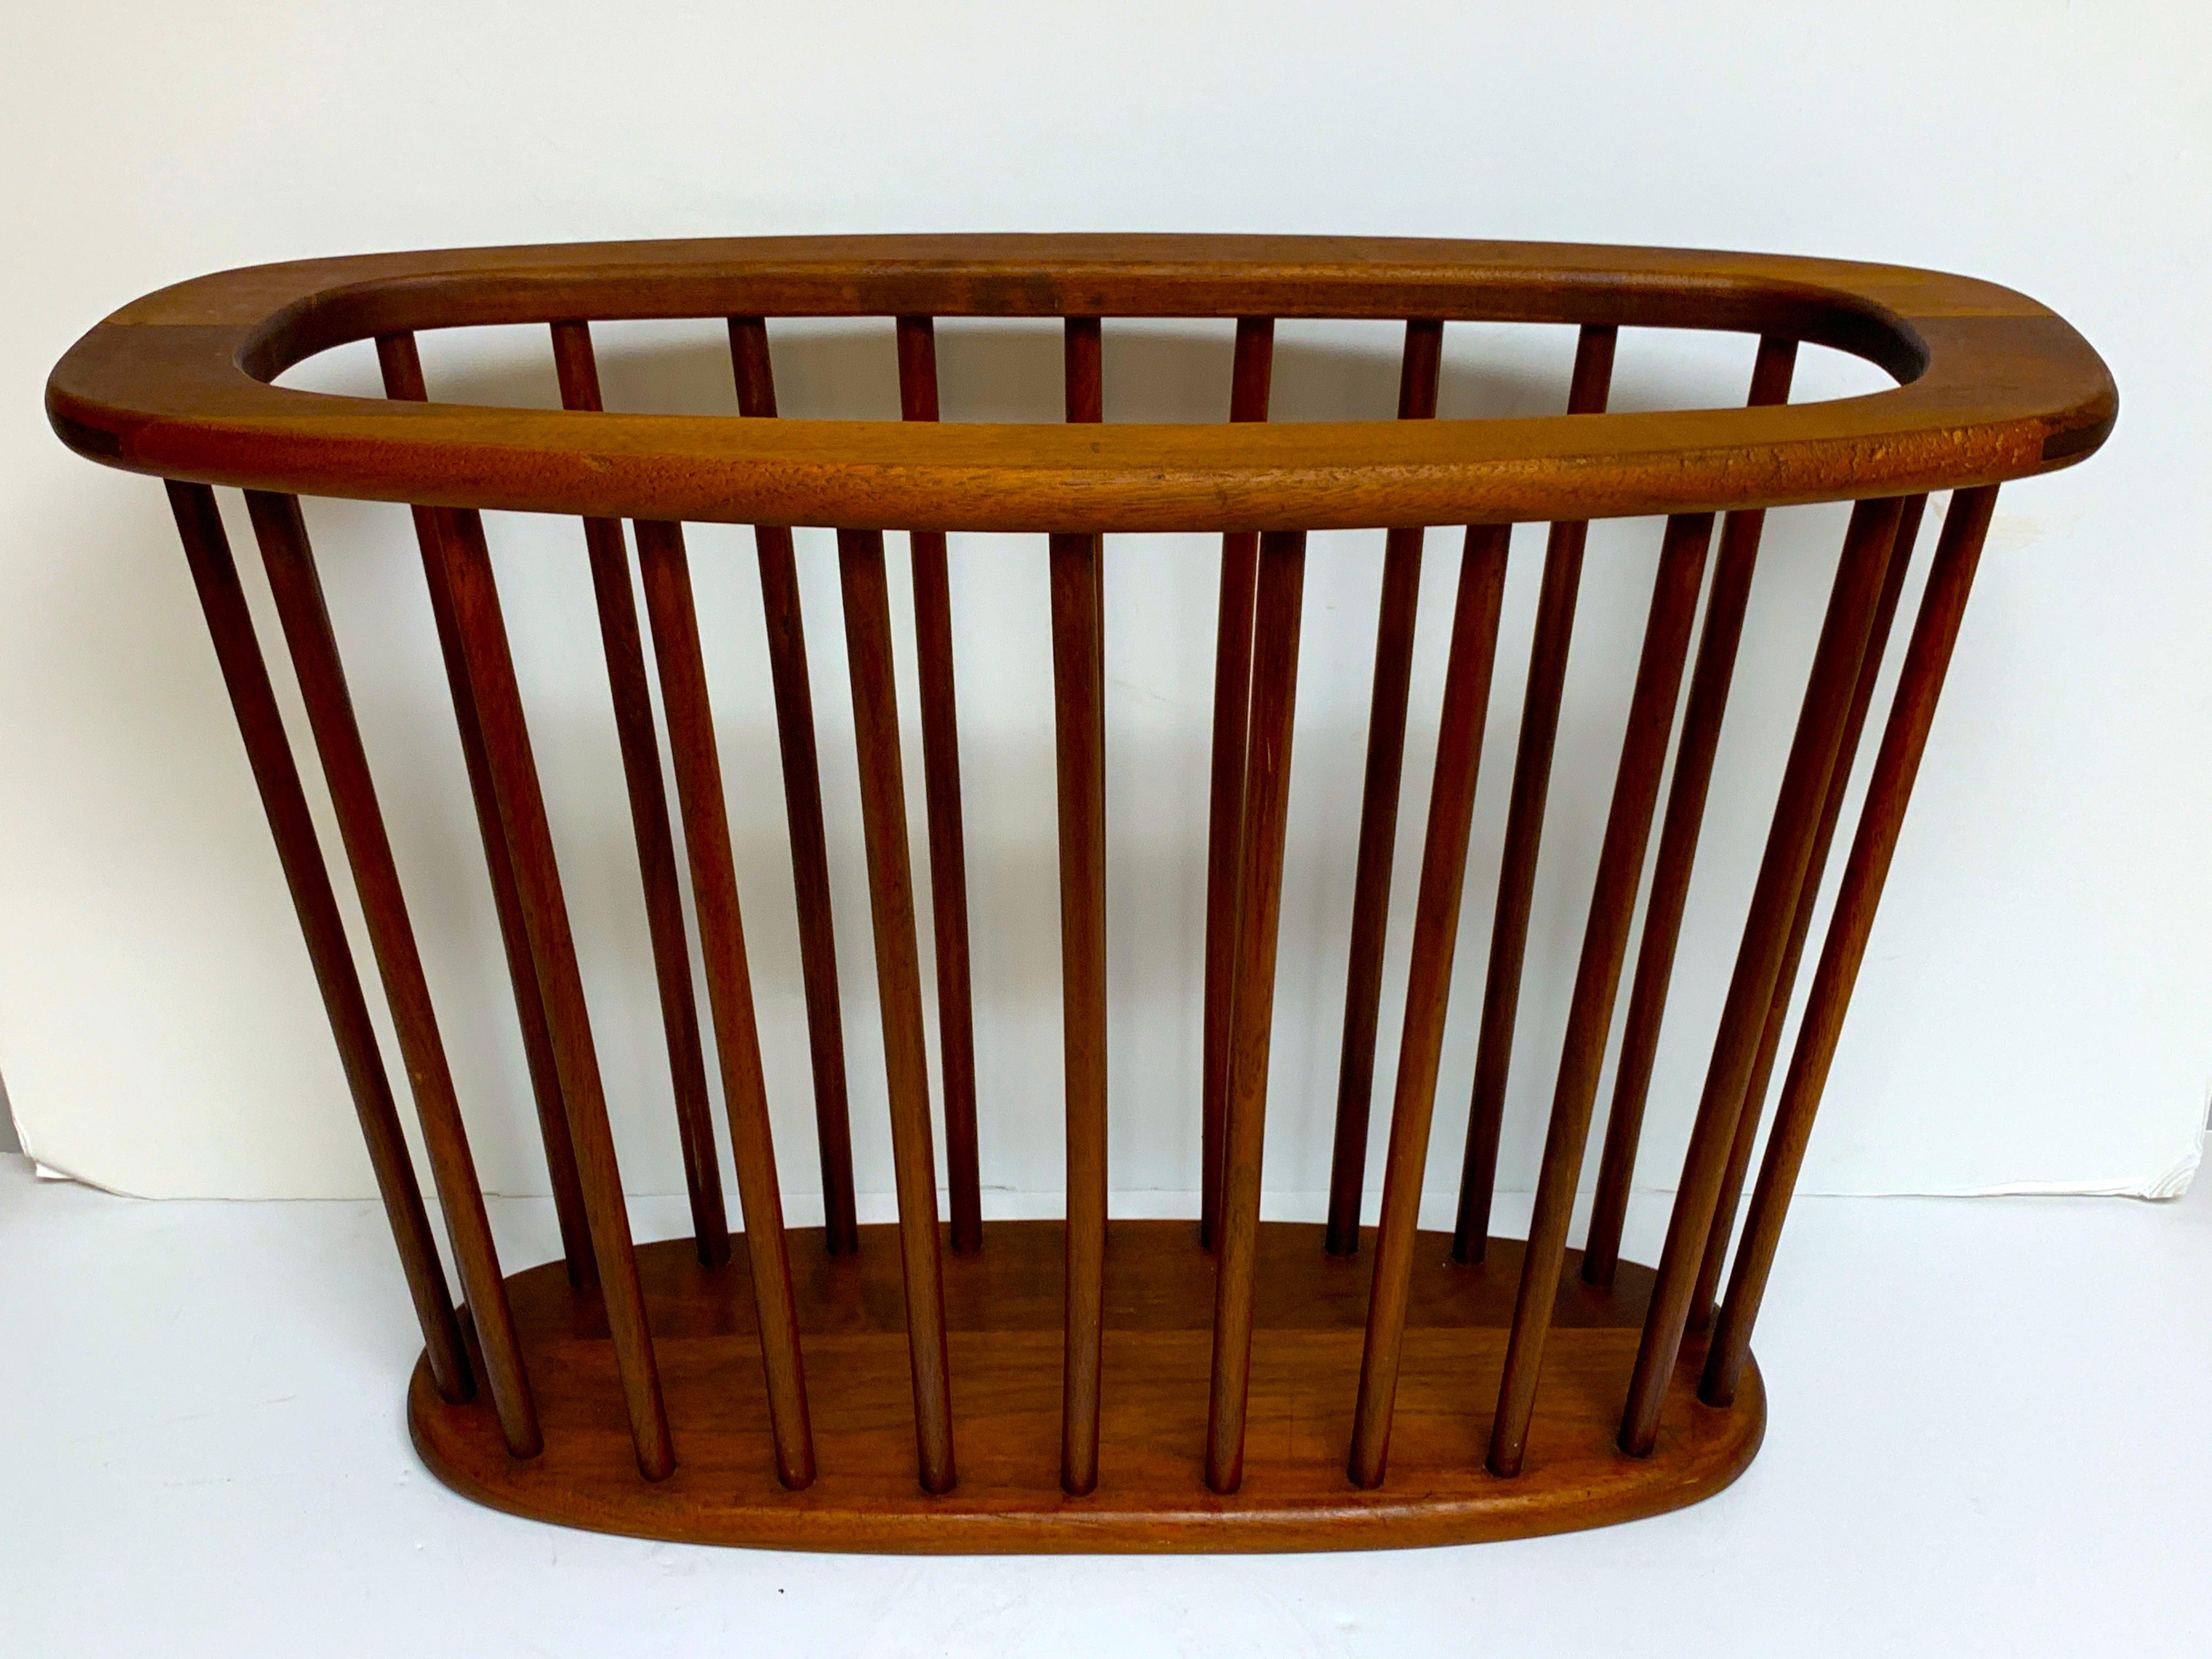 Danish modern oval spindle teak magazine rack, better than most with dovetailed construction. Ready to place.